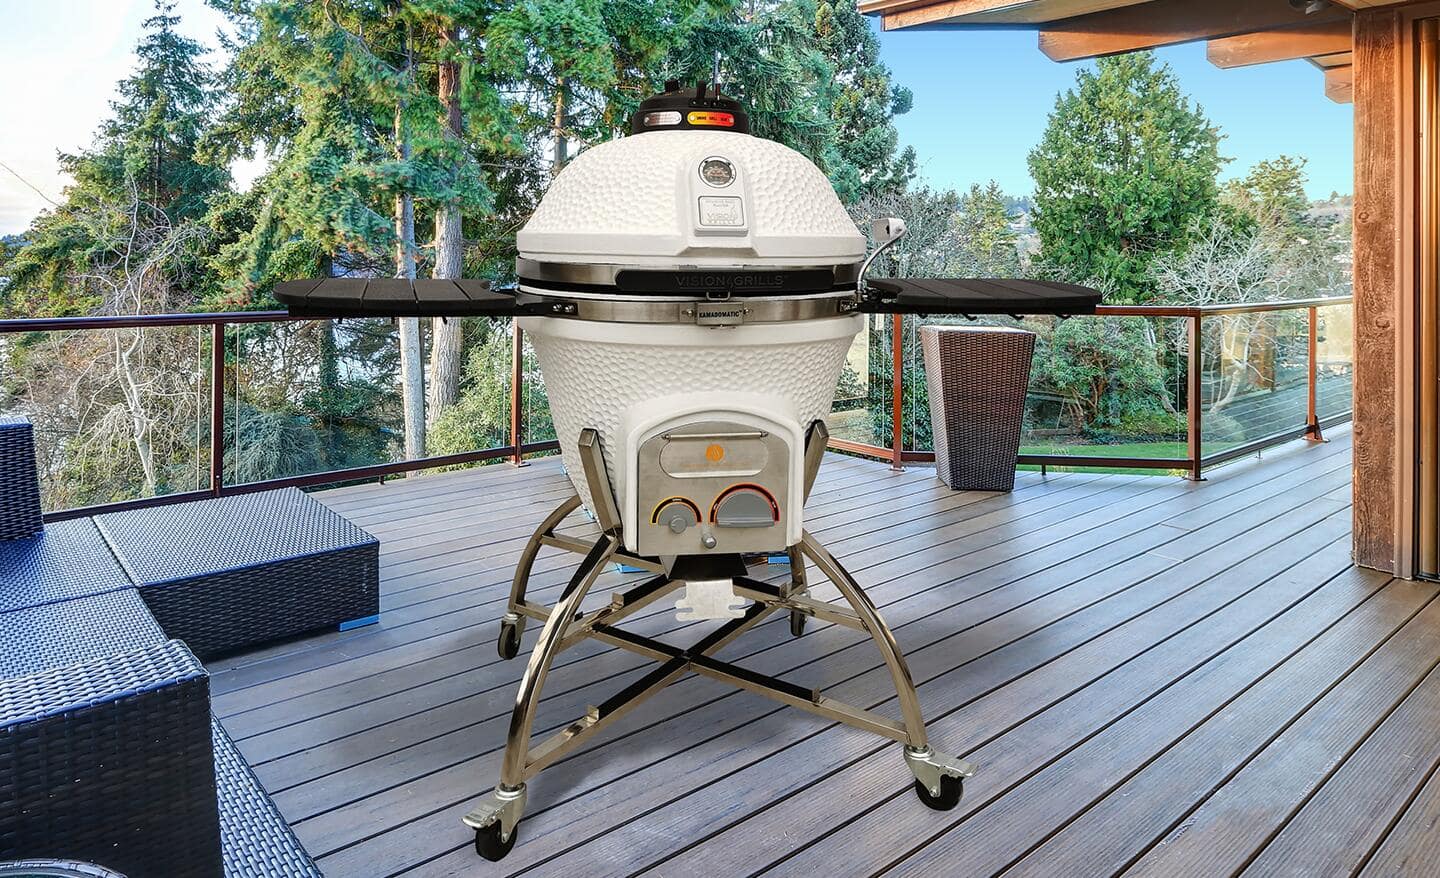 A white kamado grill stands on a patio.